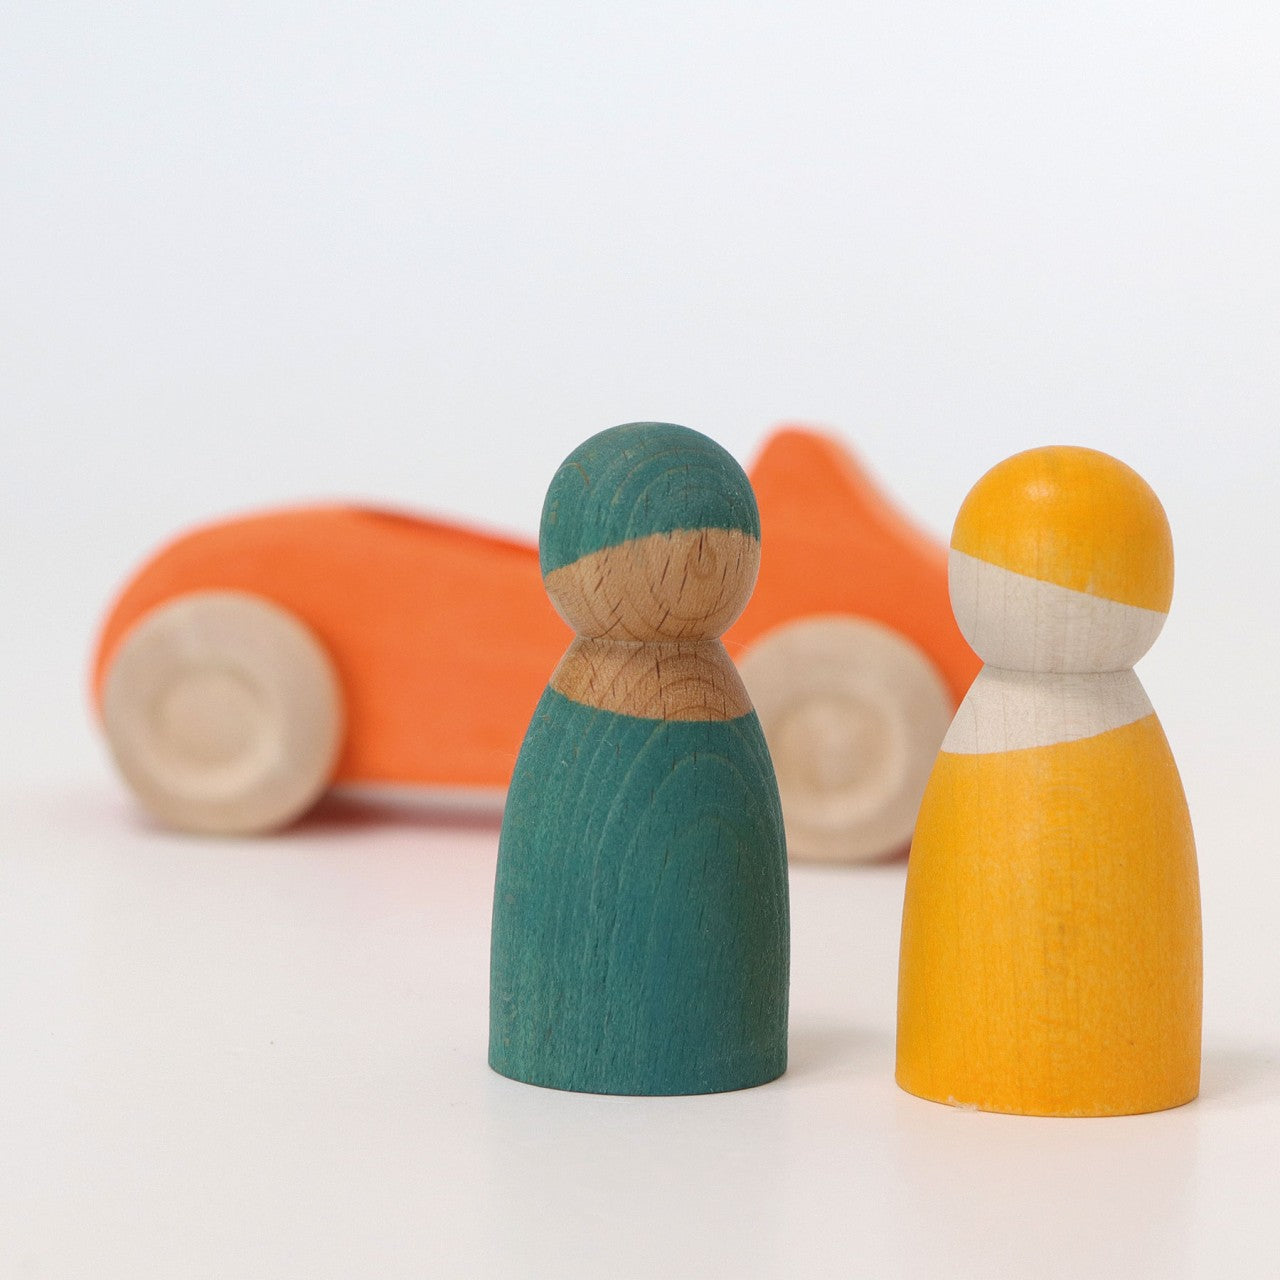 Orange - Large Convertible Toy Car | Wooden Imaginative Play Toys